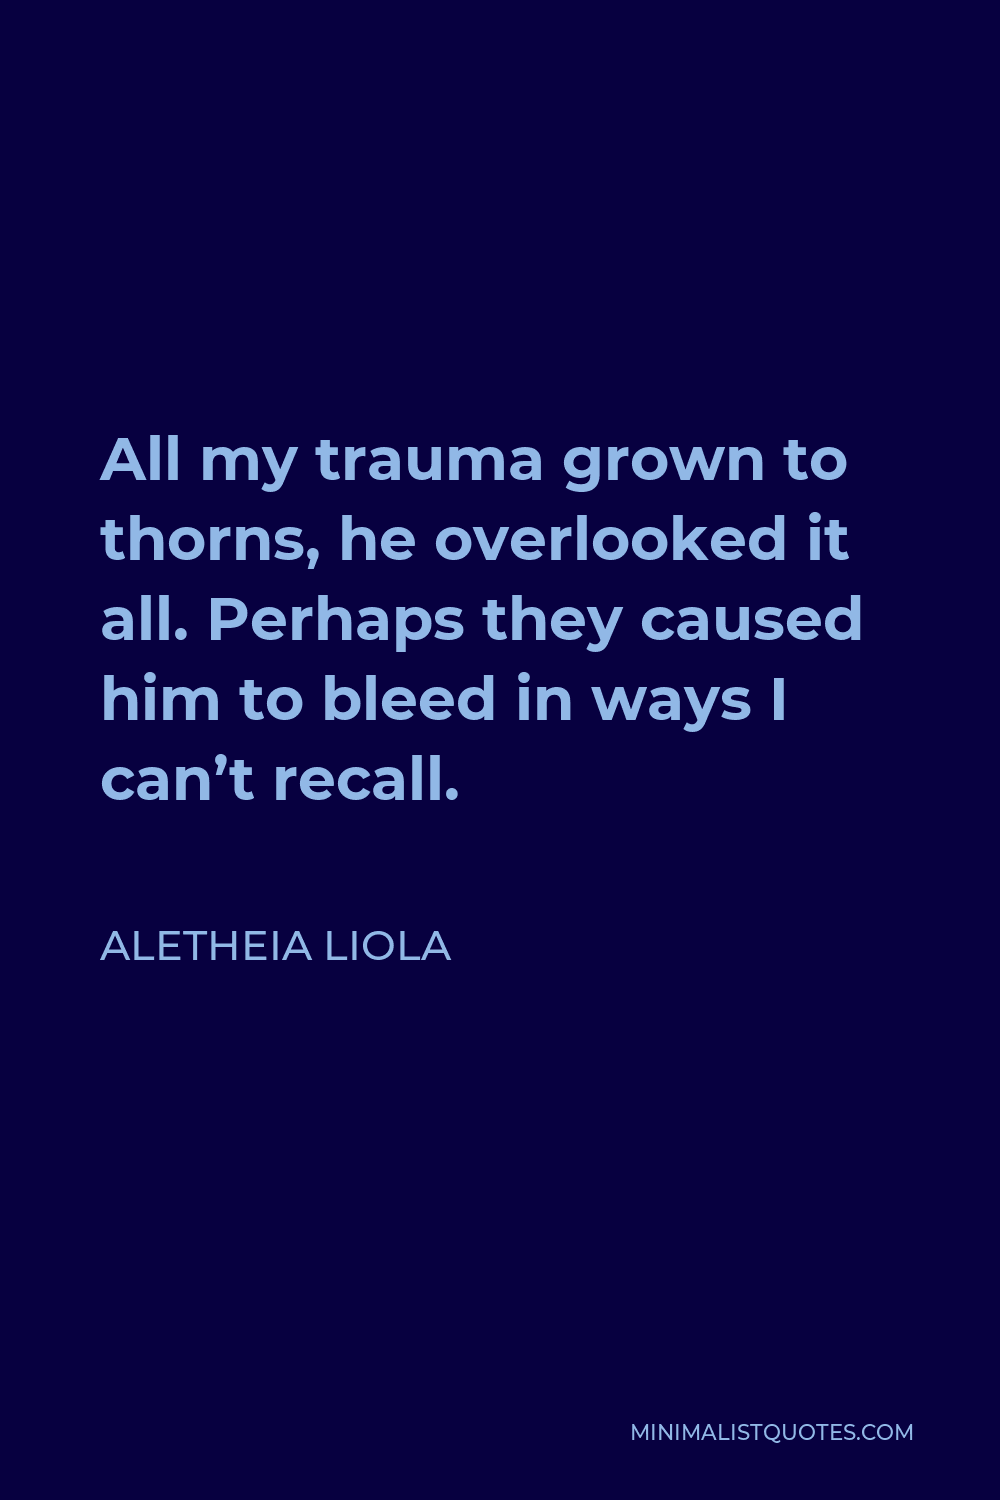 Aletheia Liola Quote - All my trauma grown to thorns, he overlooked it all. Perhaps they caused him to bleed in ways I can’t recall.